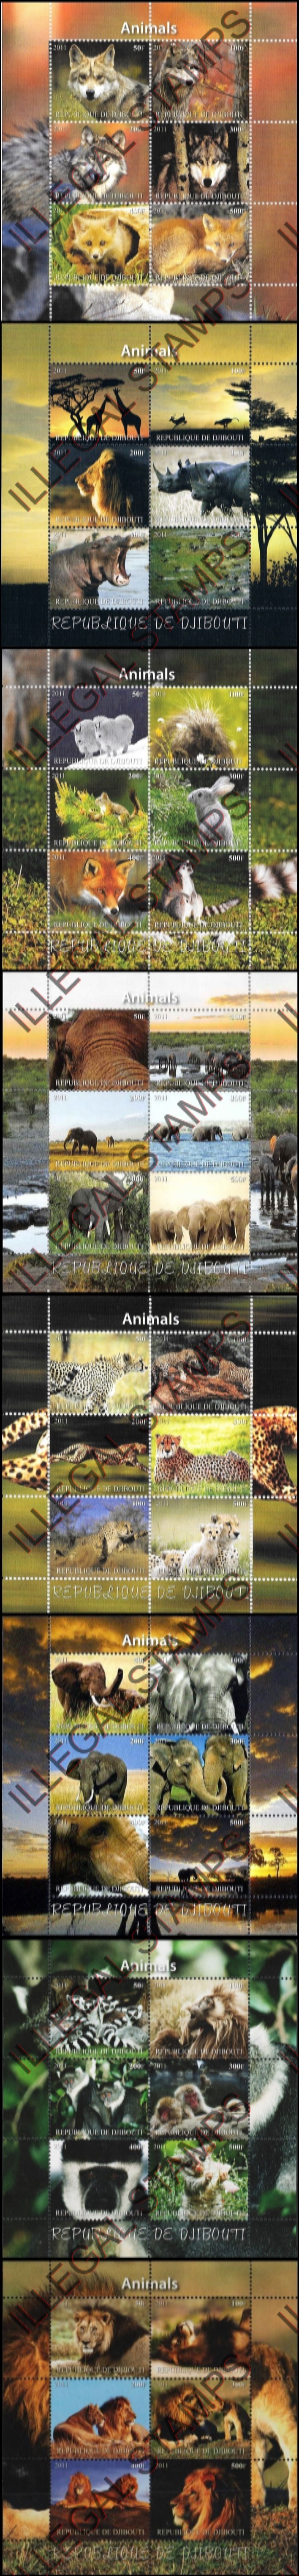 Djibouti 2011 Animals Vertical Illegal Stamp Sheetlets of 6 with Picture Backgrounds